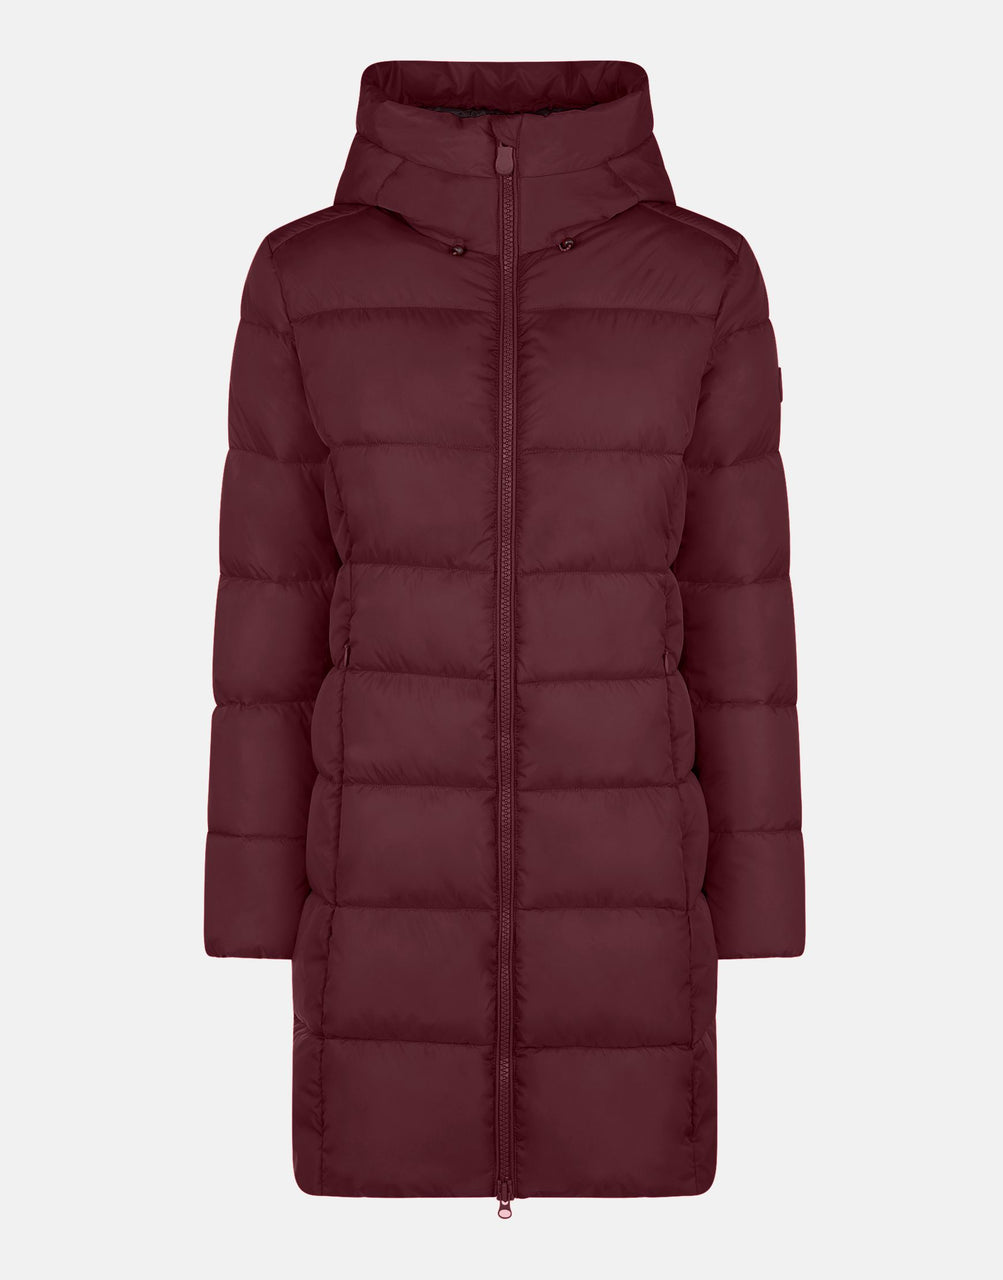 Taylor Hooded Coat - Wine Red